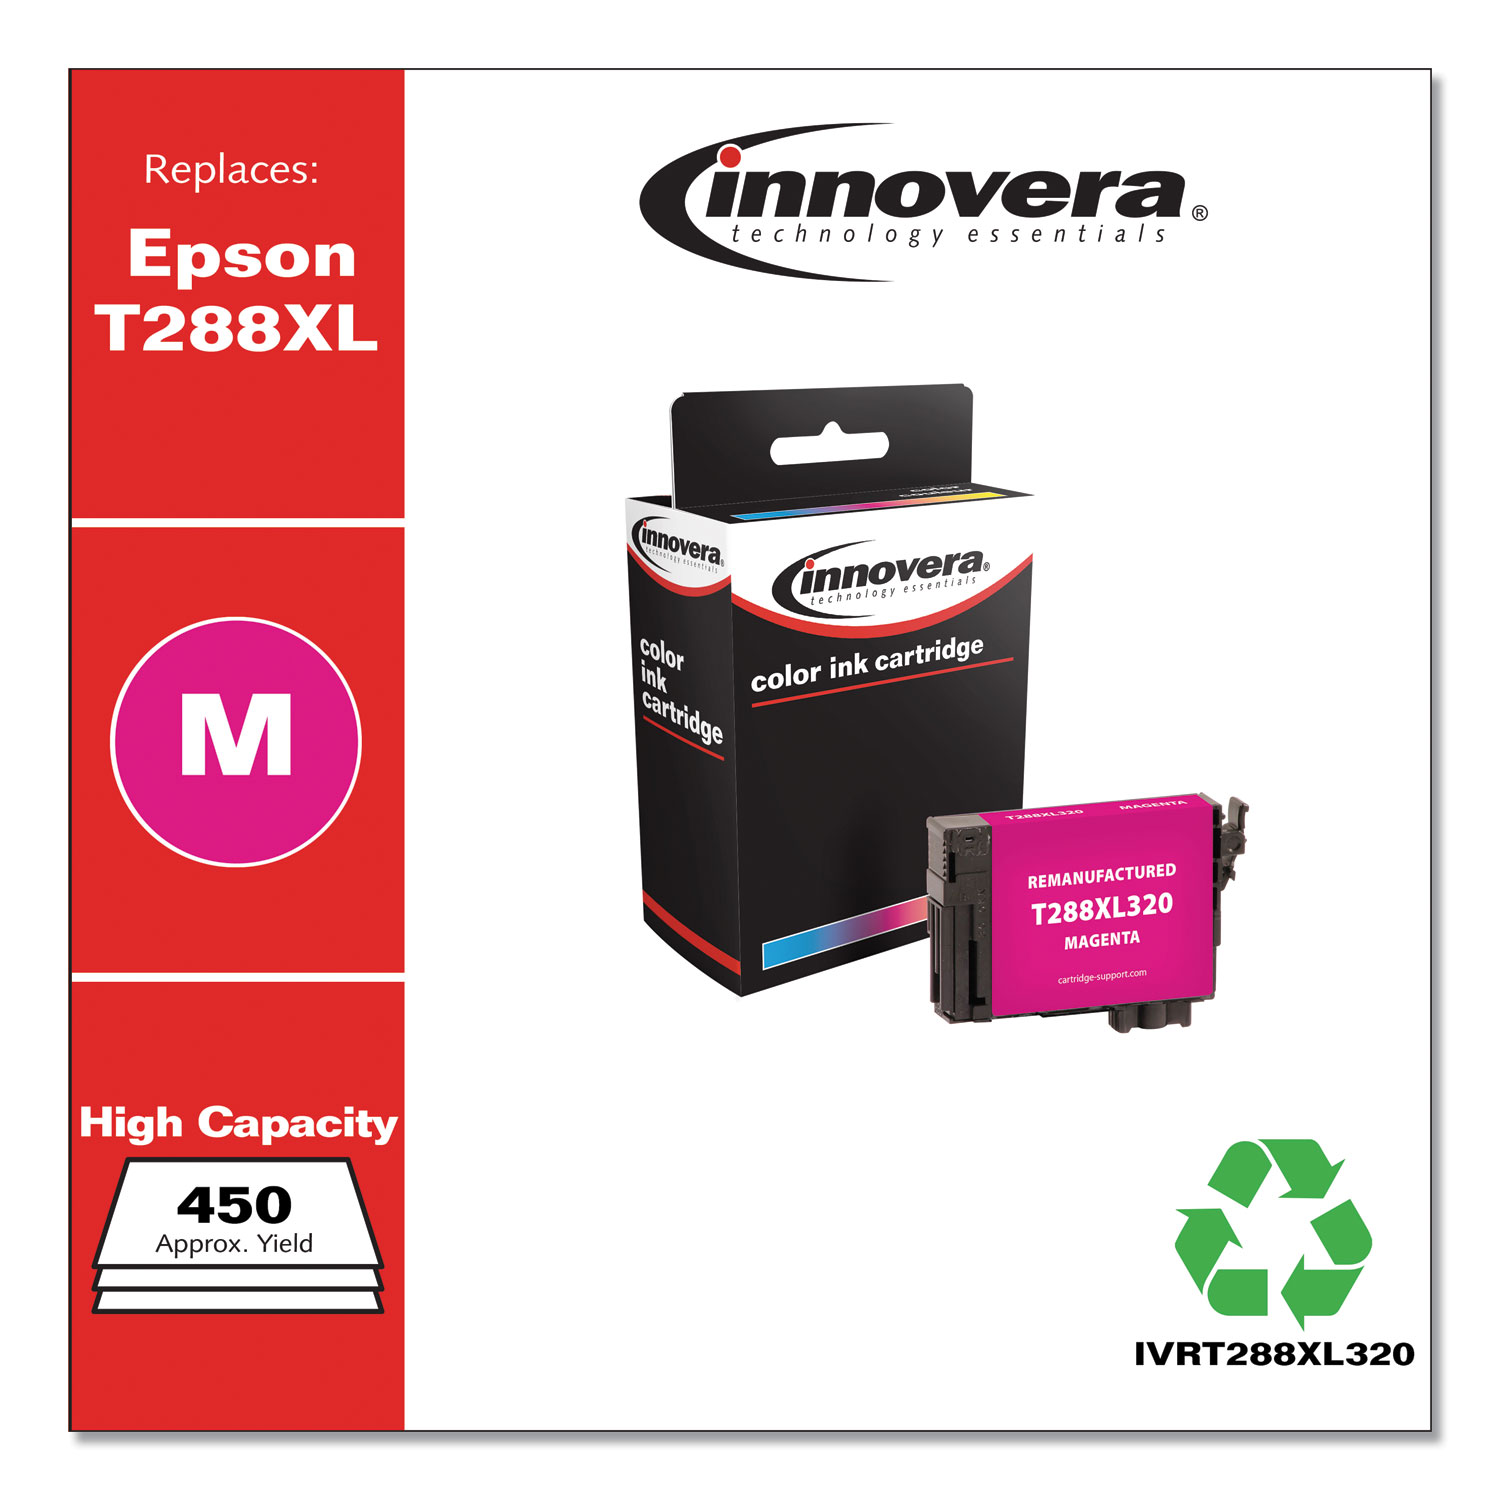  Innovera IVRT288XL320 Remanufactured Magenta High-Yield Ink, Replacement for Epson T288XL (T288XL320), 450 Page-Yield (IVRT288XL320) 